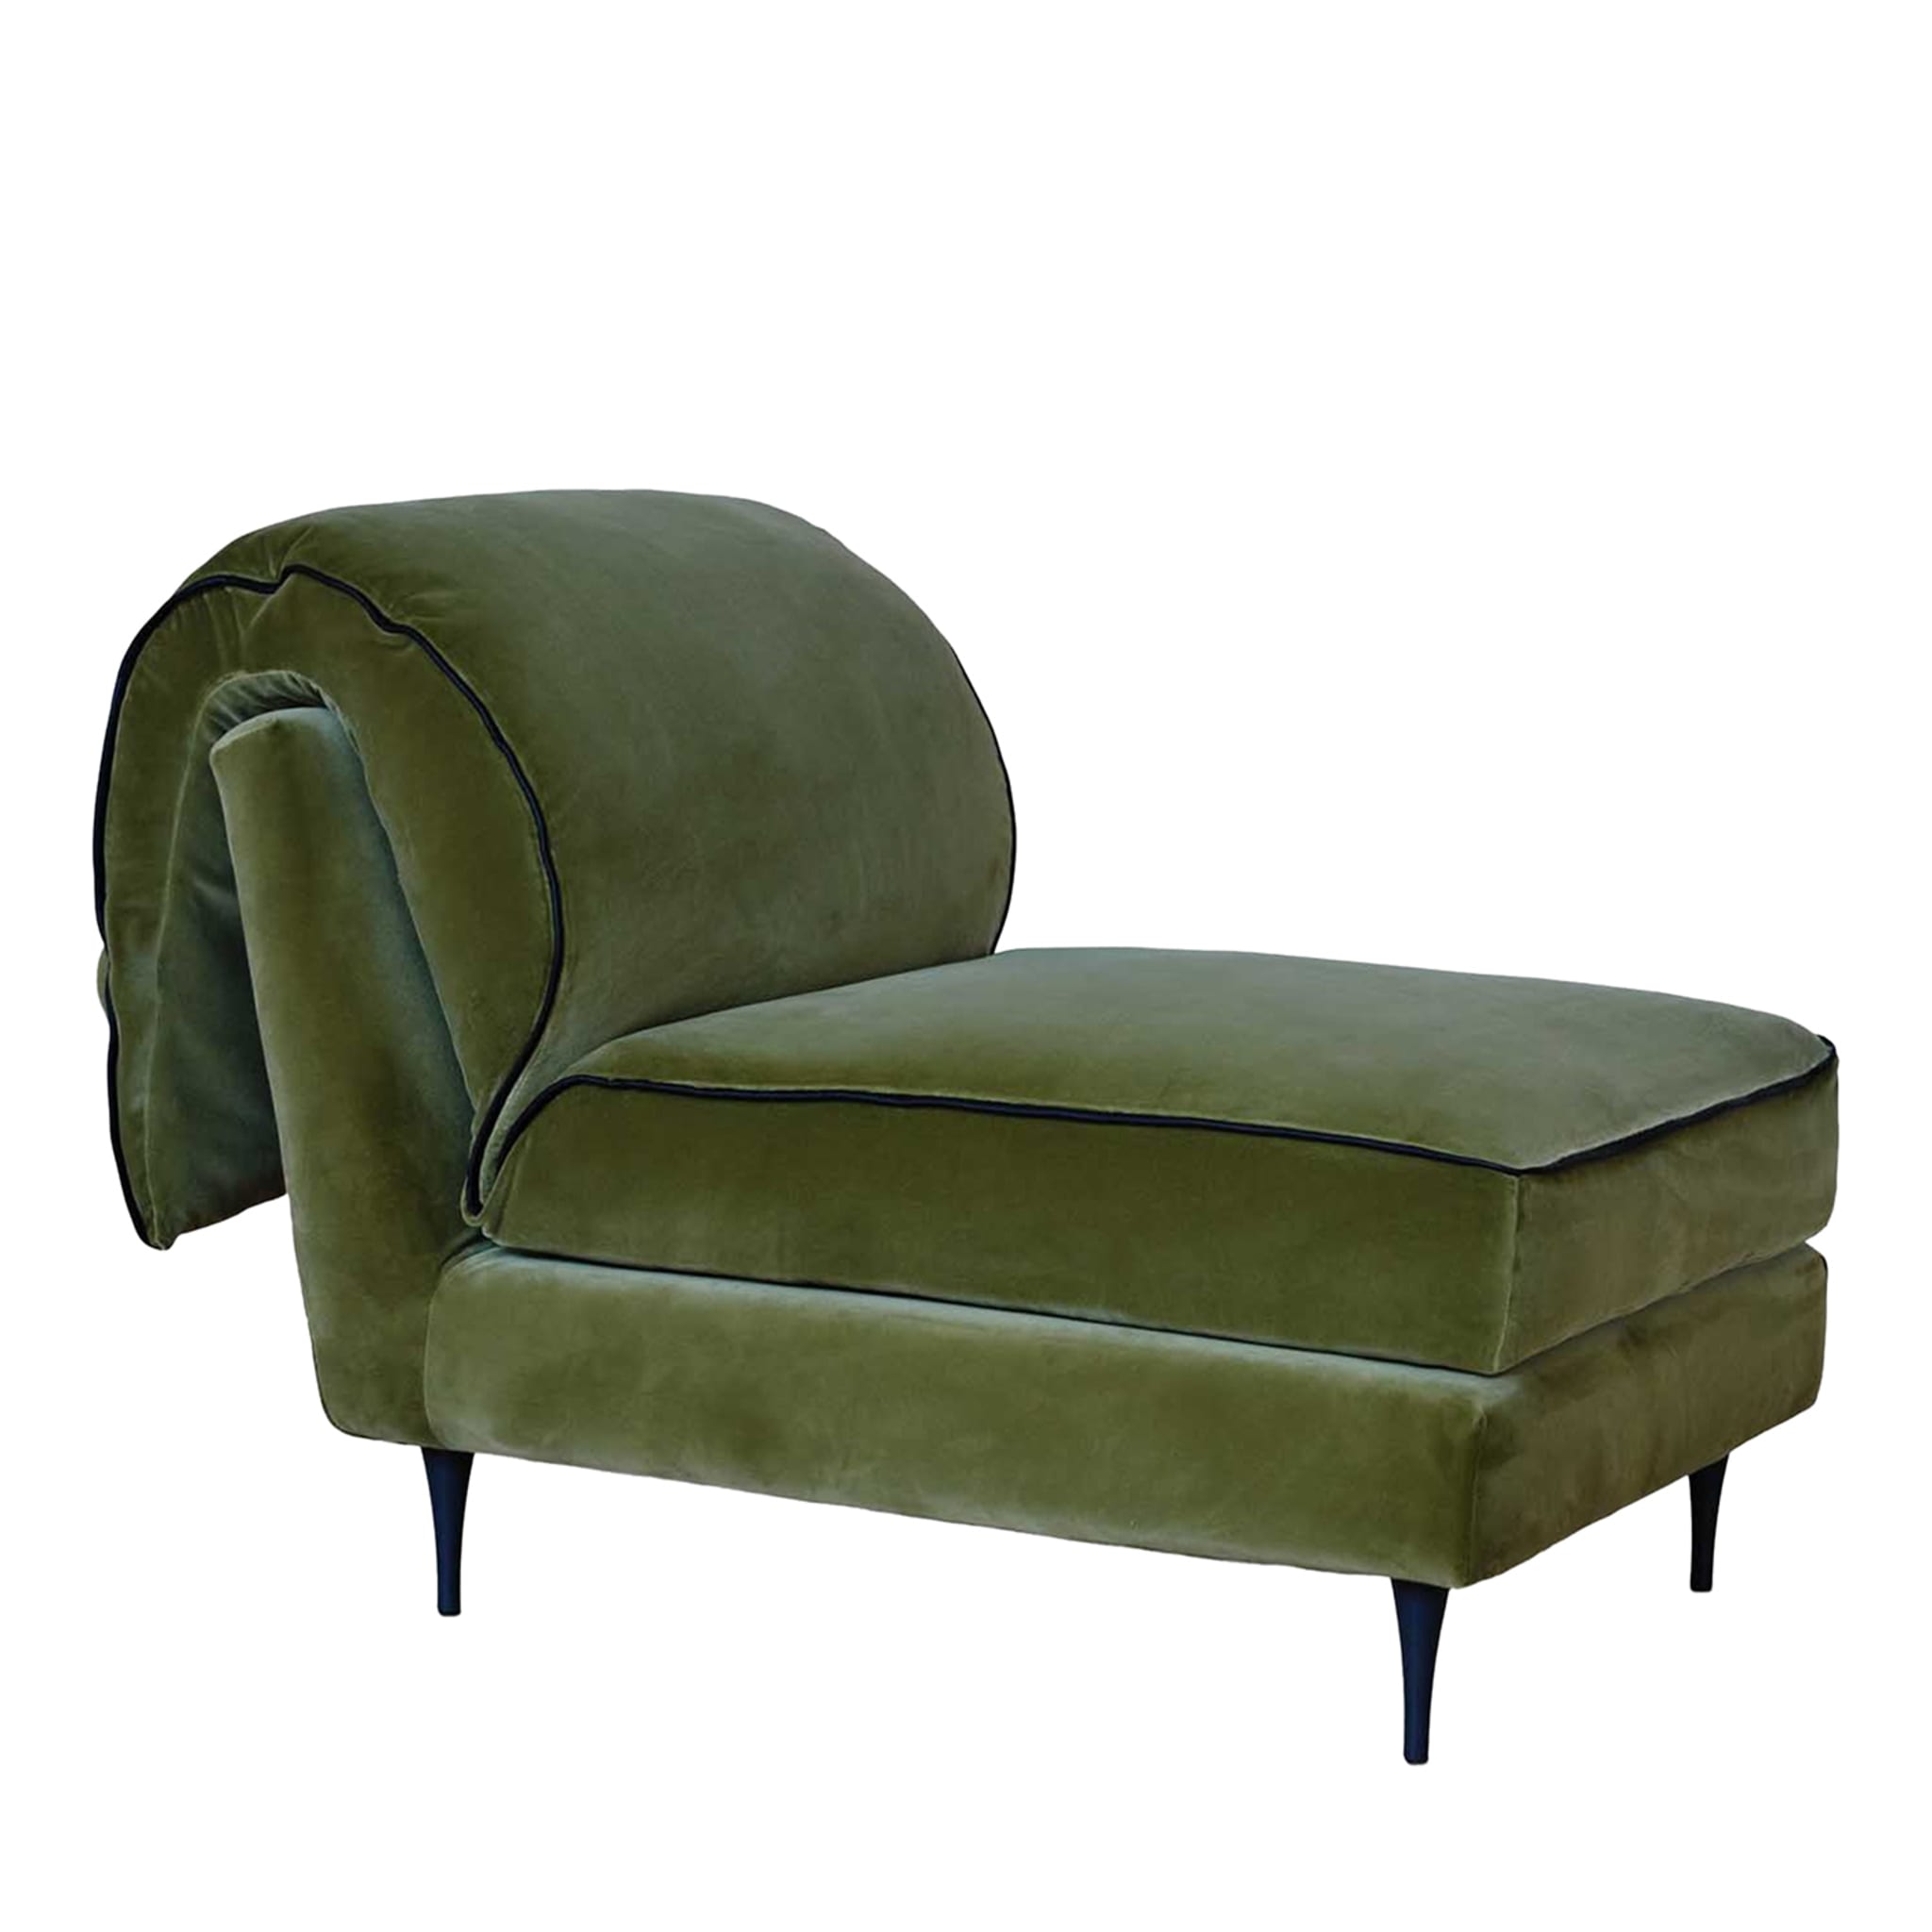 Casquet Mini in Olive Green Velvet Daybed - Main view